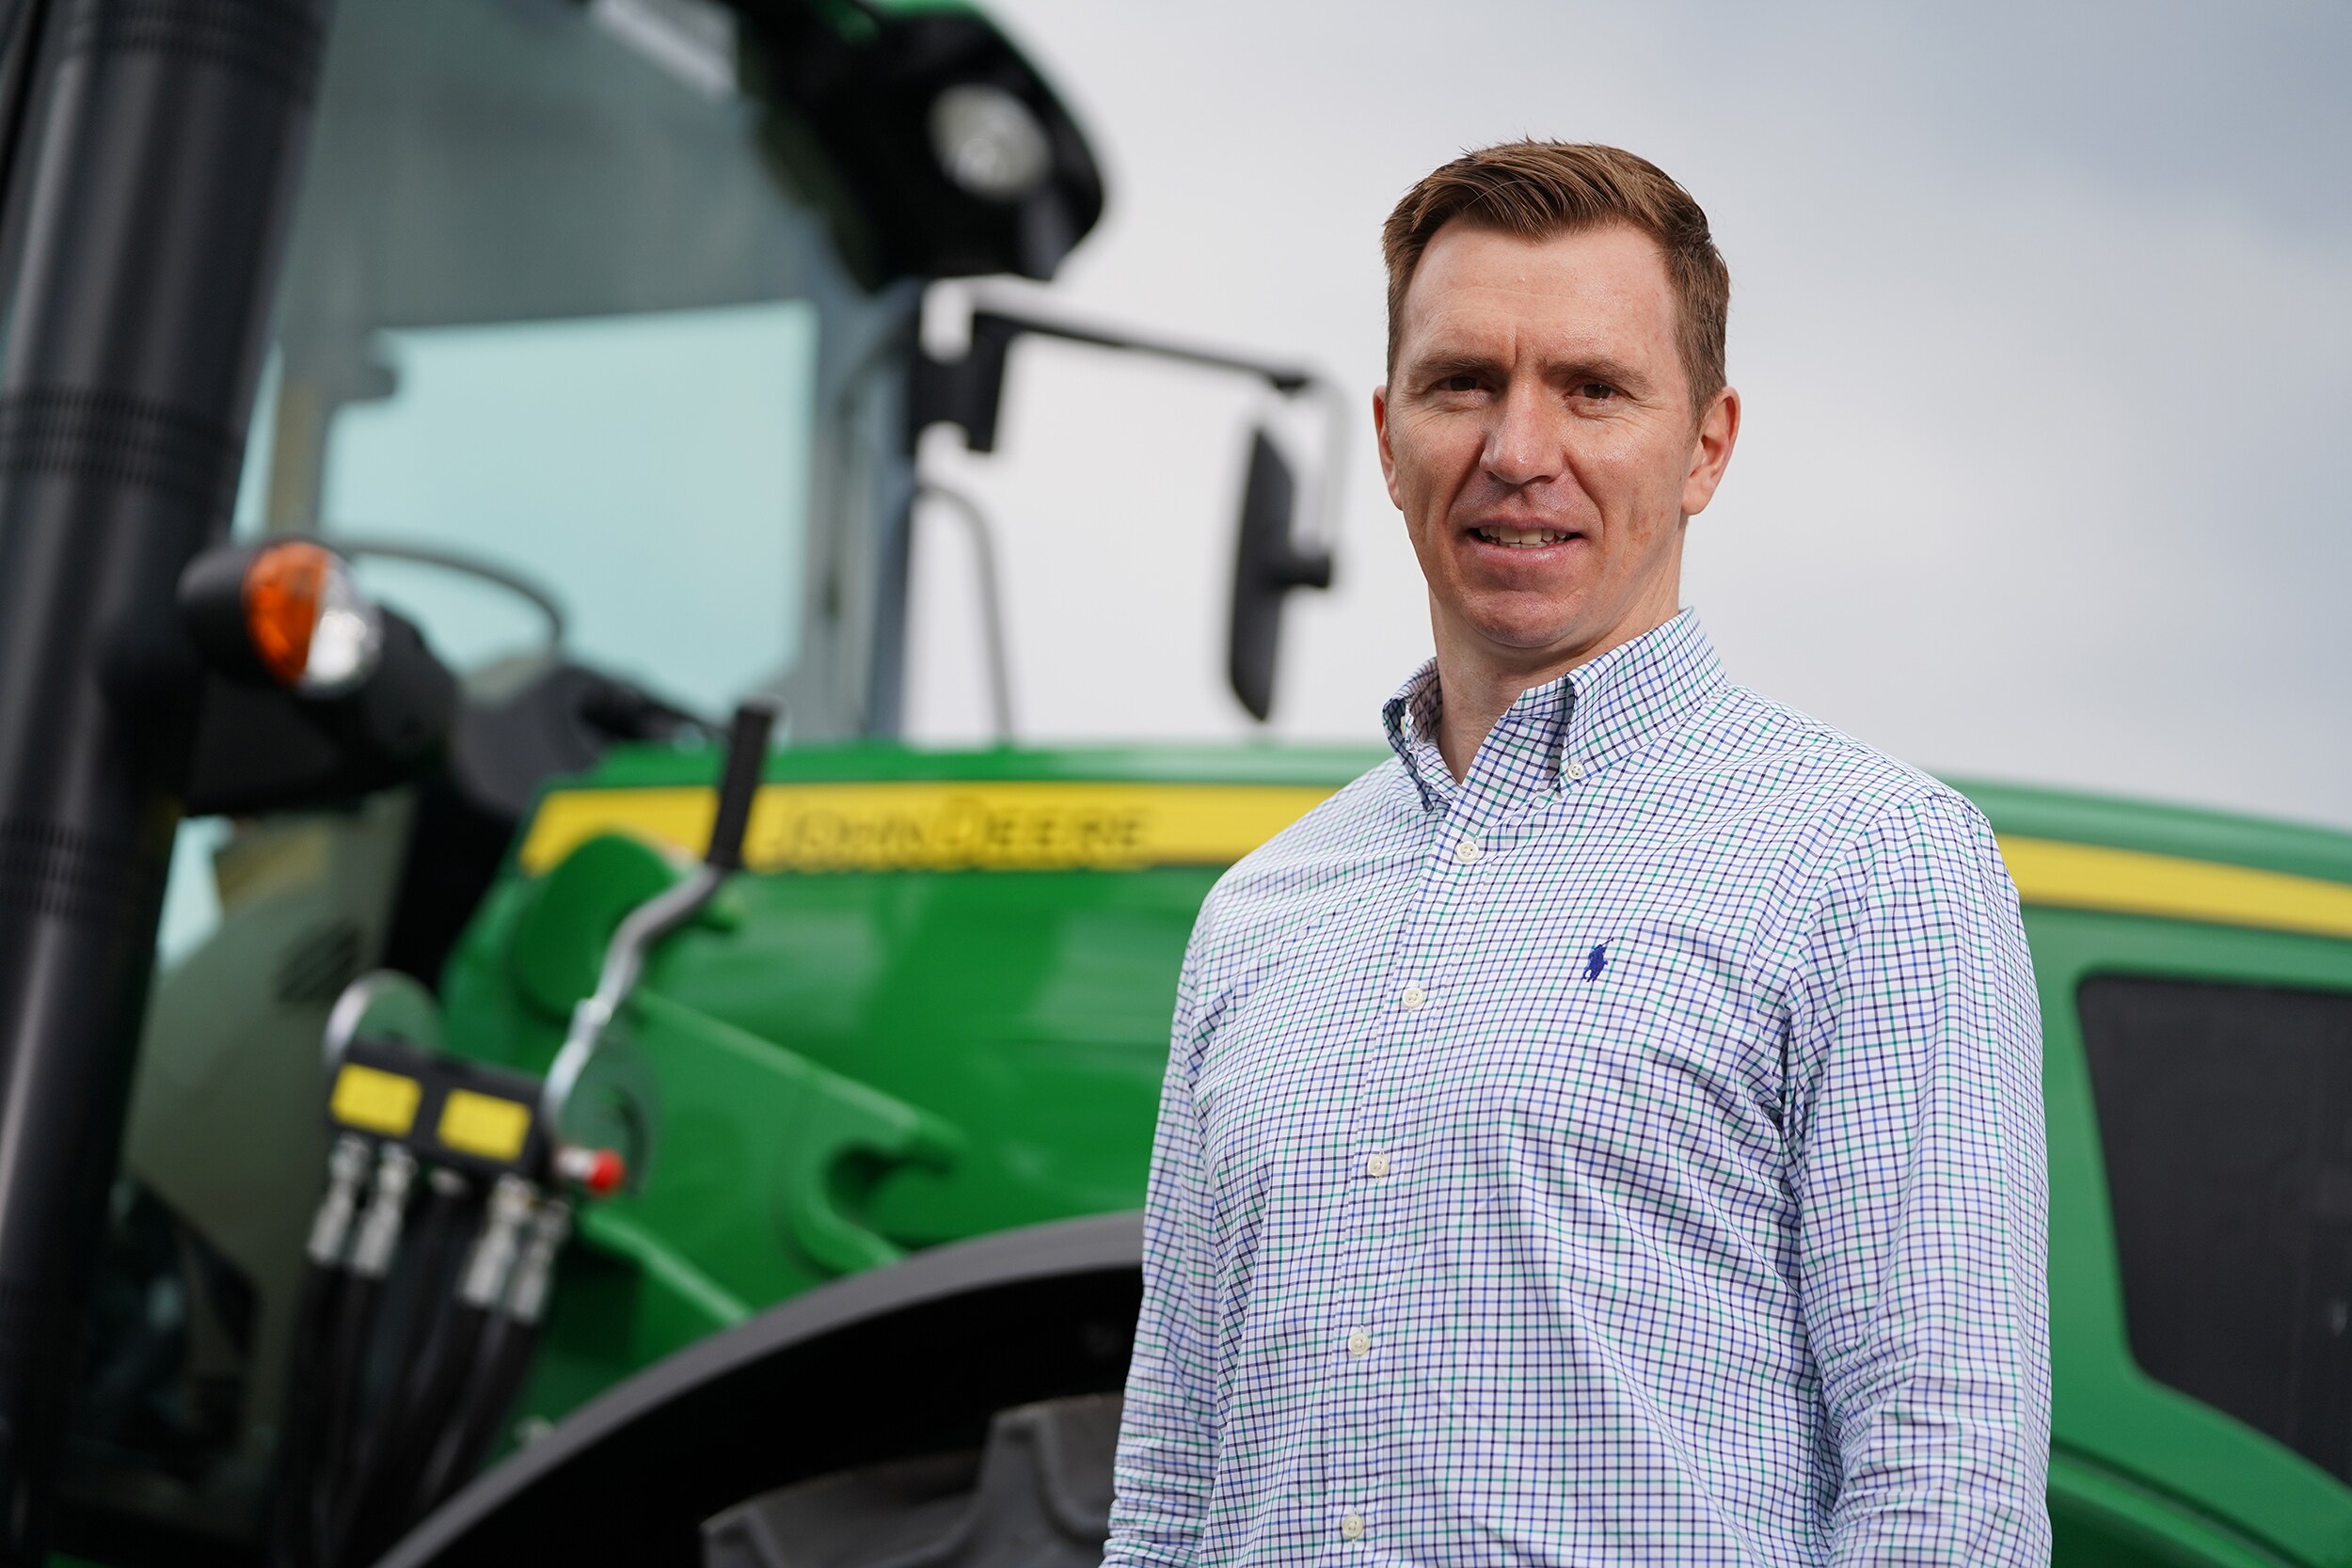 Ben Kelly stands in front of a tractor